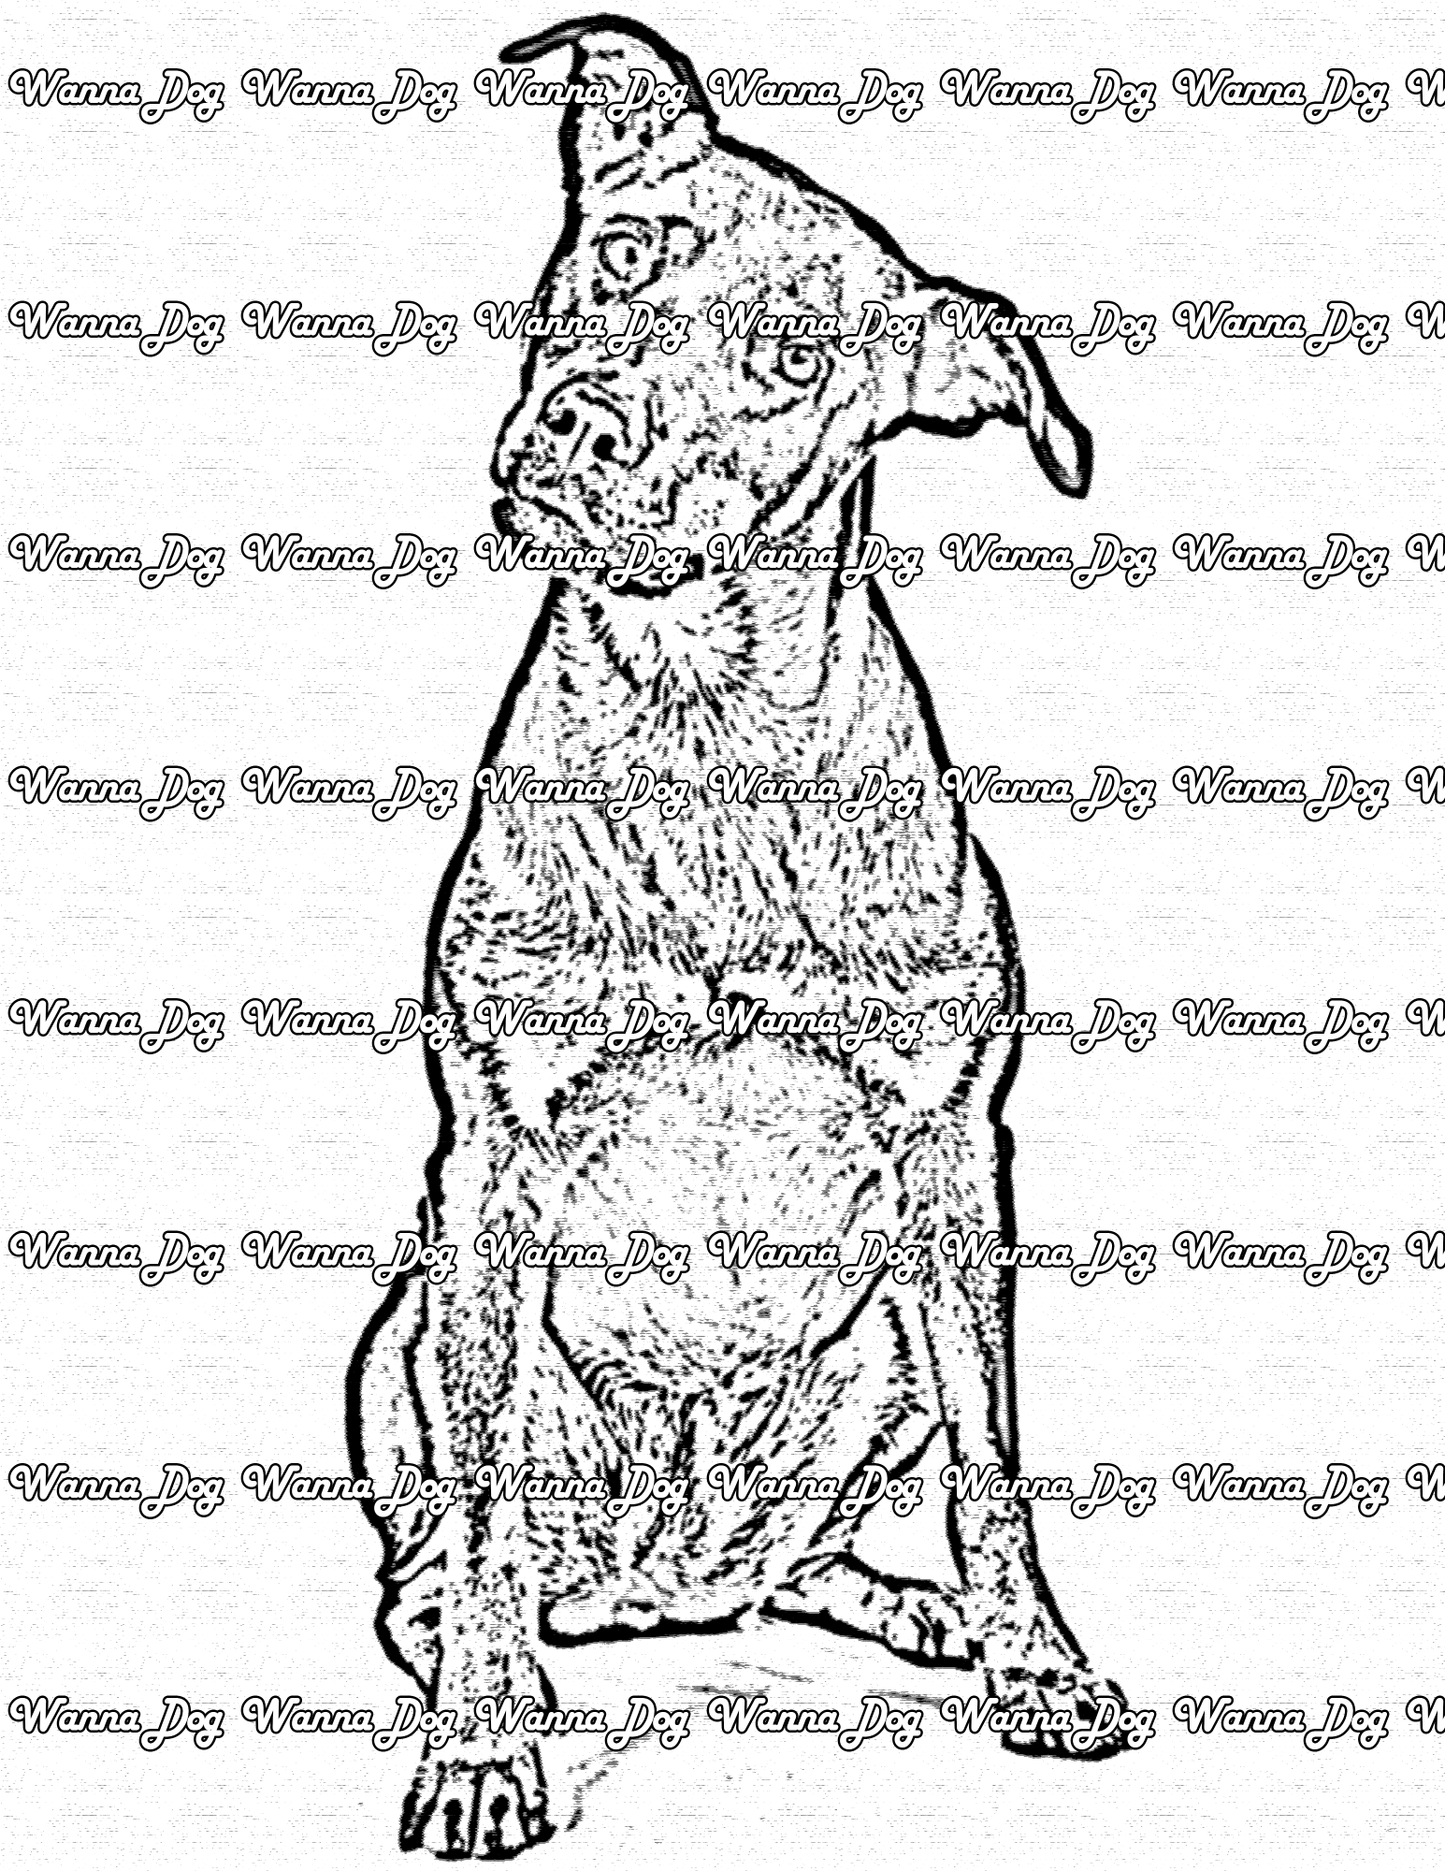 Rottweiler Coloring Page of a Rottweiler sitting and tilting their head